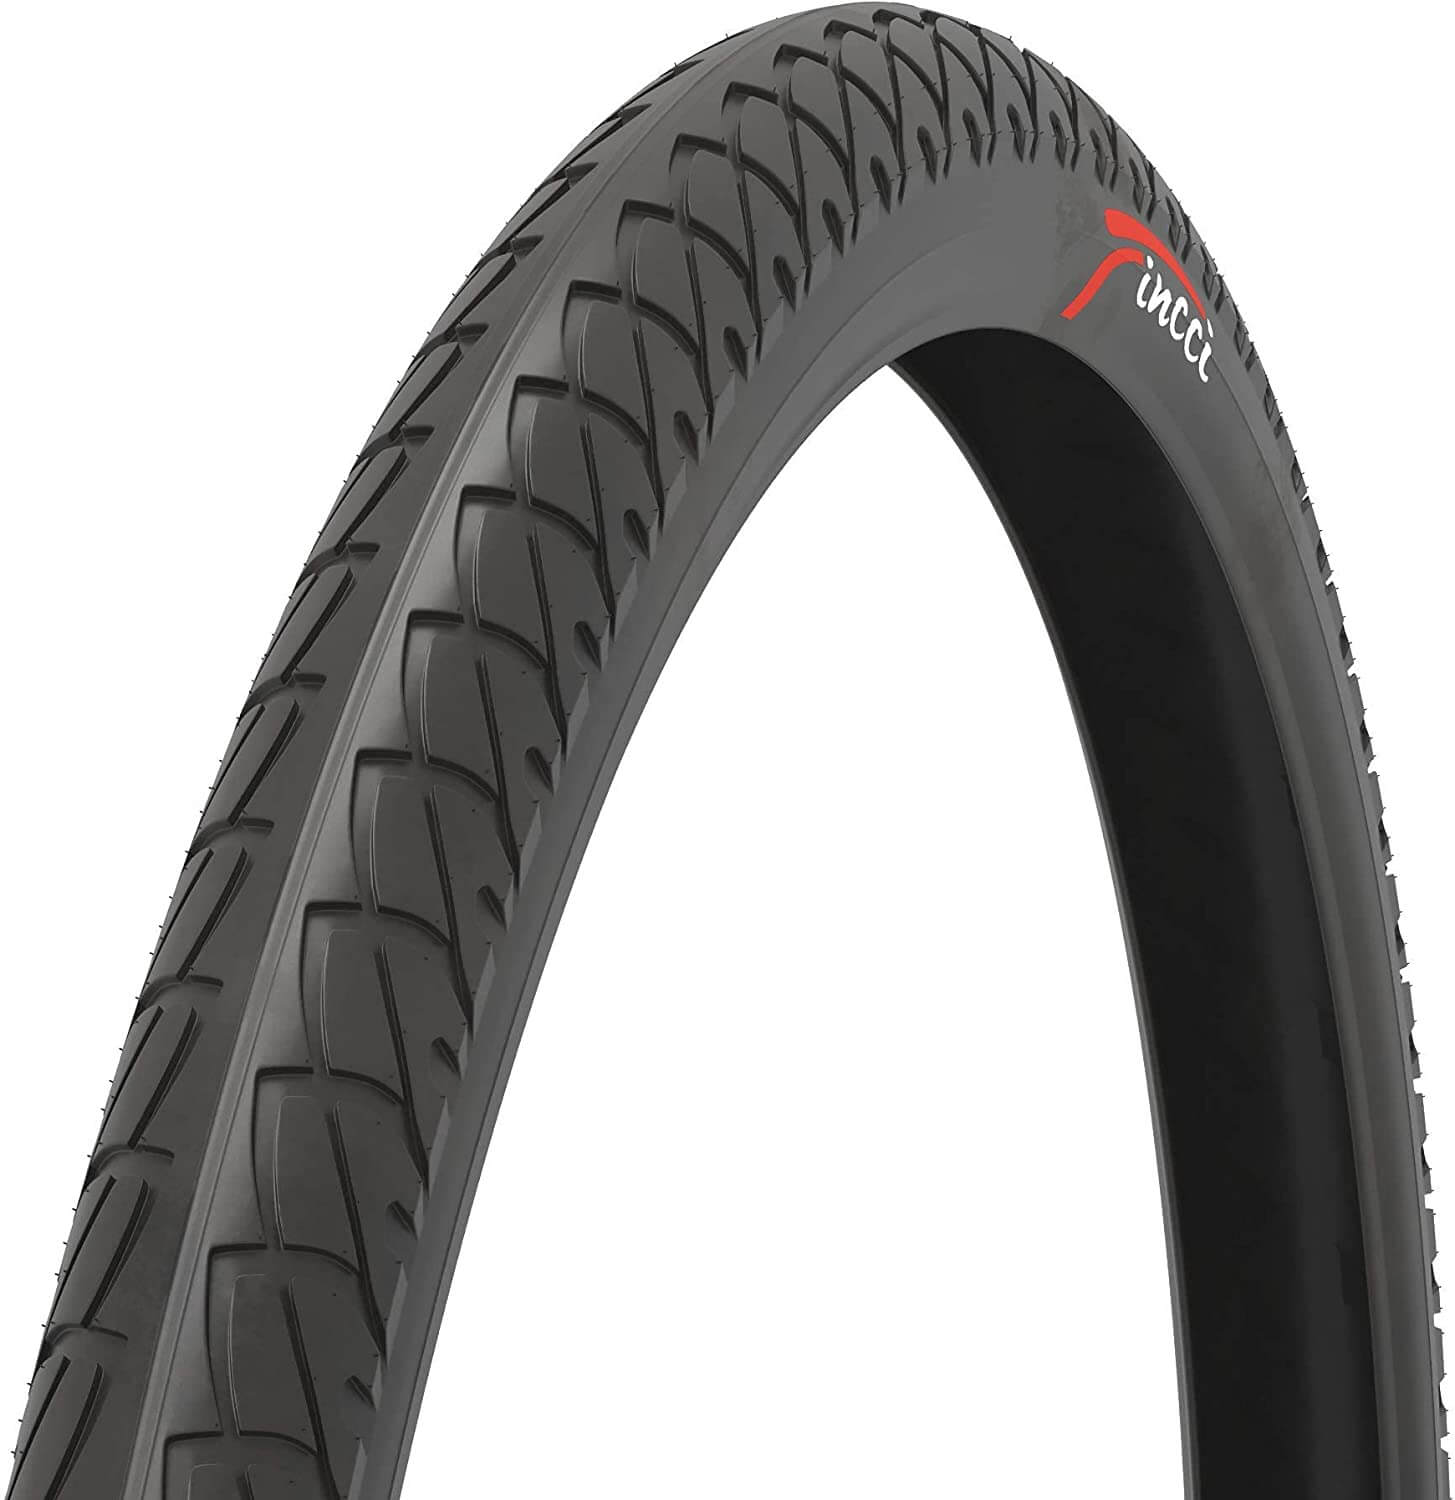 Fincci Slick 26 x 1.95 53-559 Road Tyre with Antipuncture